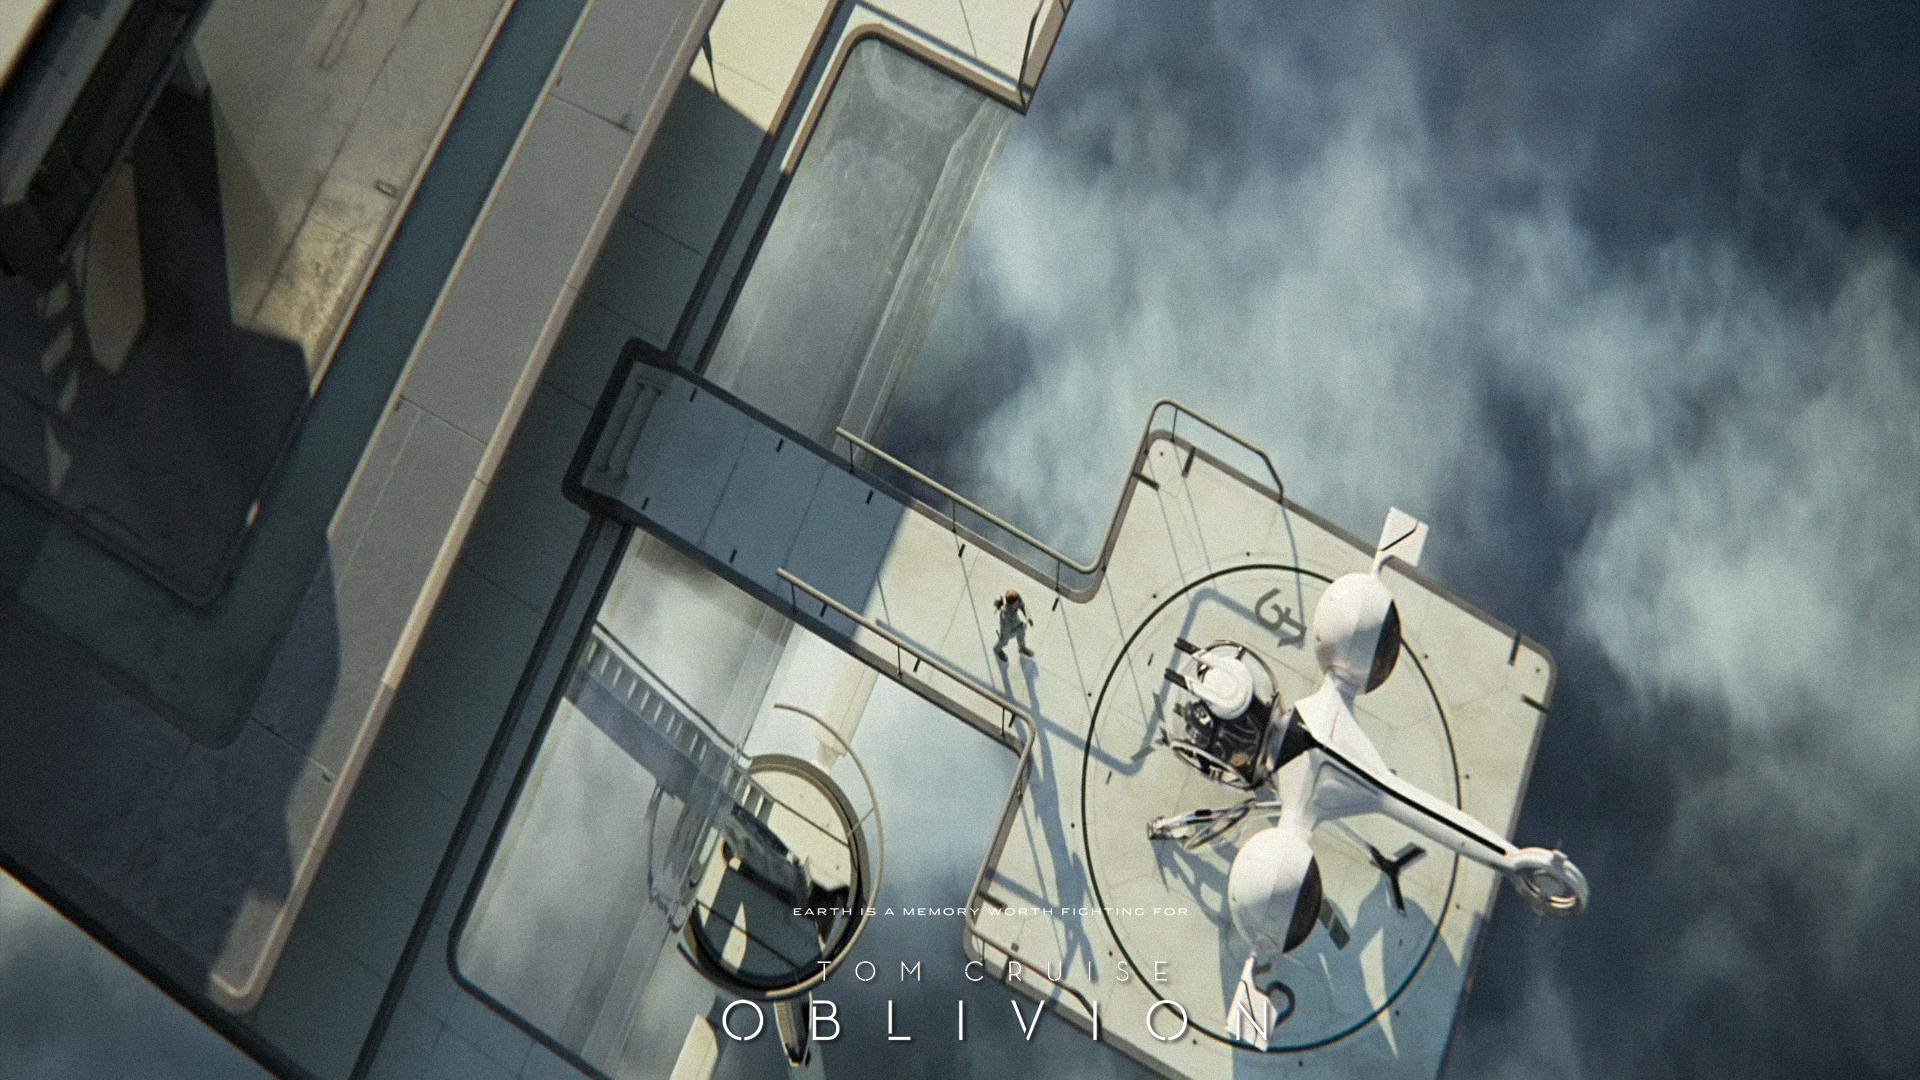 20 HD wallpapersscreenshots of Oblivion with Tom Cruise Movie